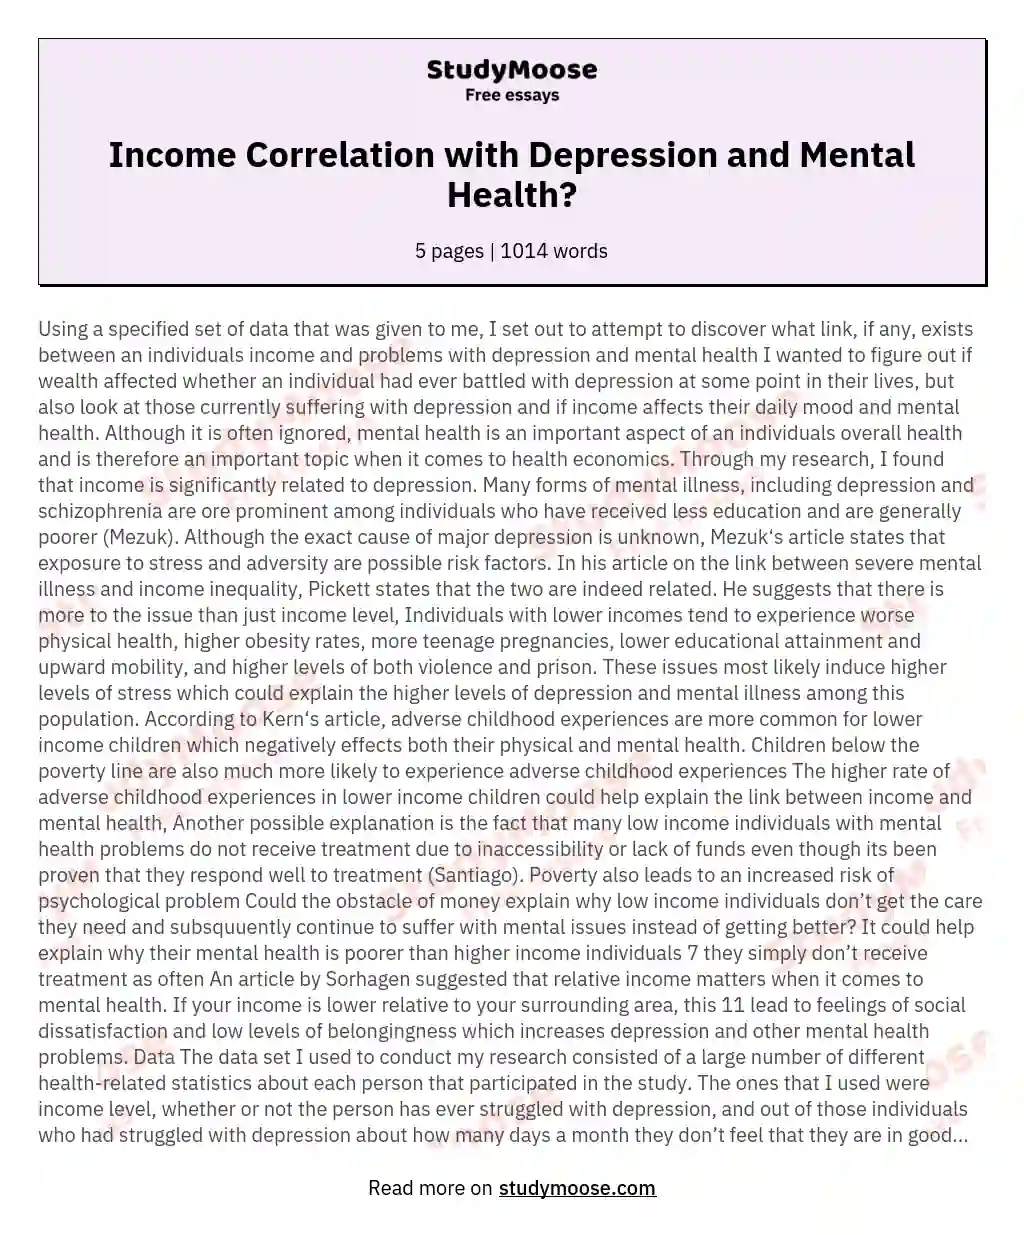 Income Correlation with Depression and Mental Health? essay